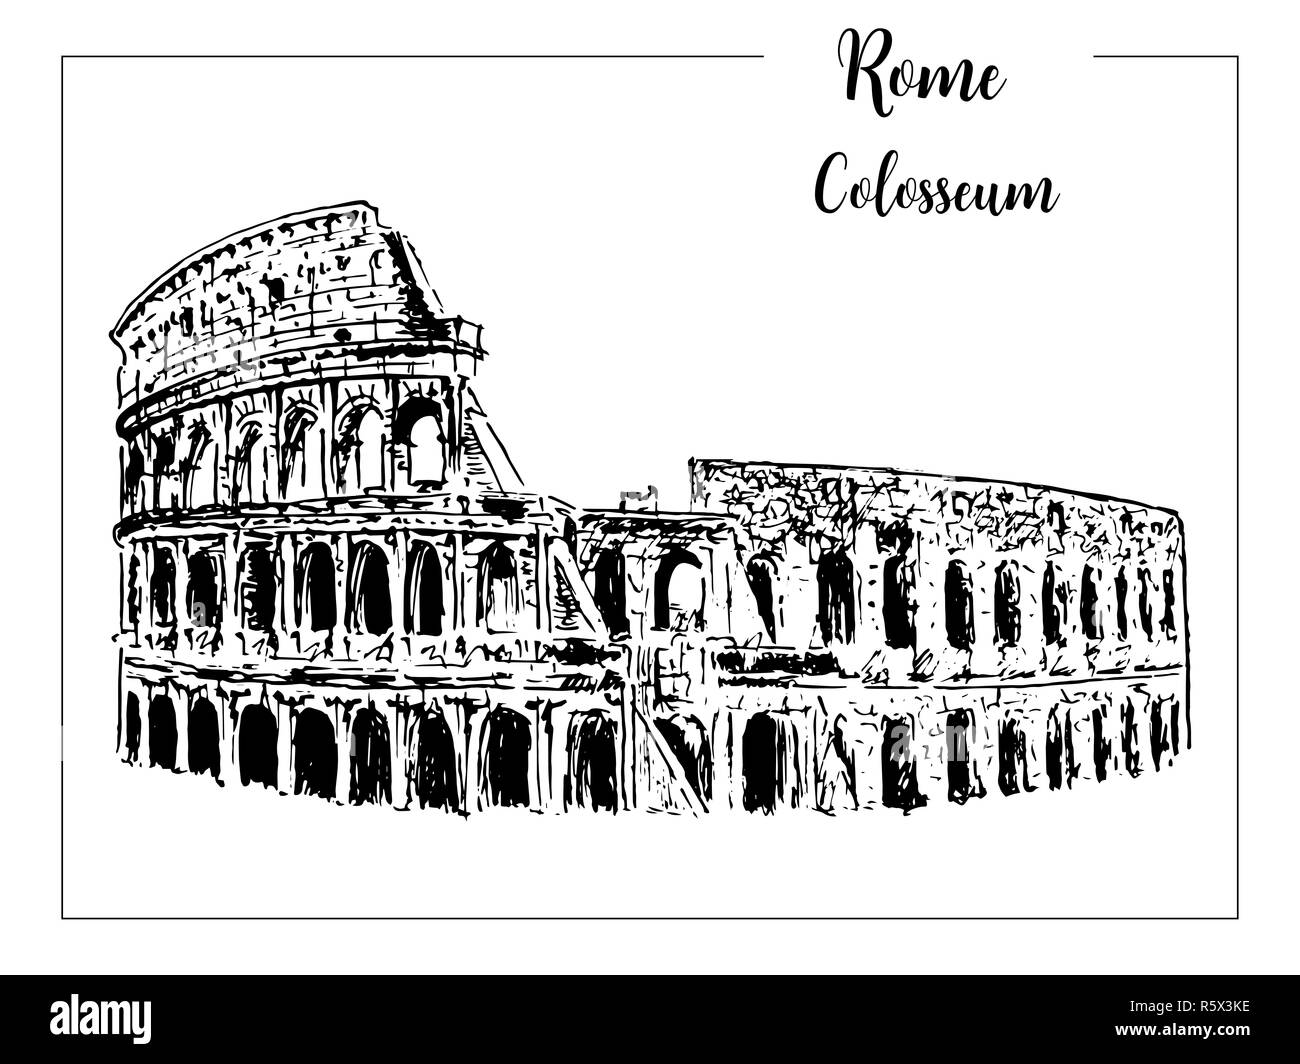 Coliseum. Rome architectural symbol. Beautiful hand drawn vector sketch illustration. Italy. isolated on white Stock Photo